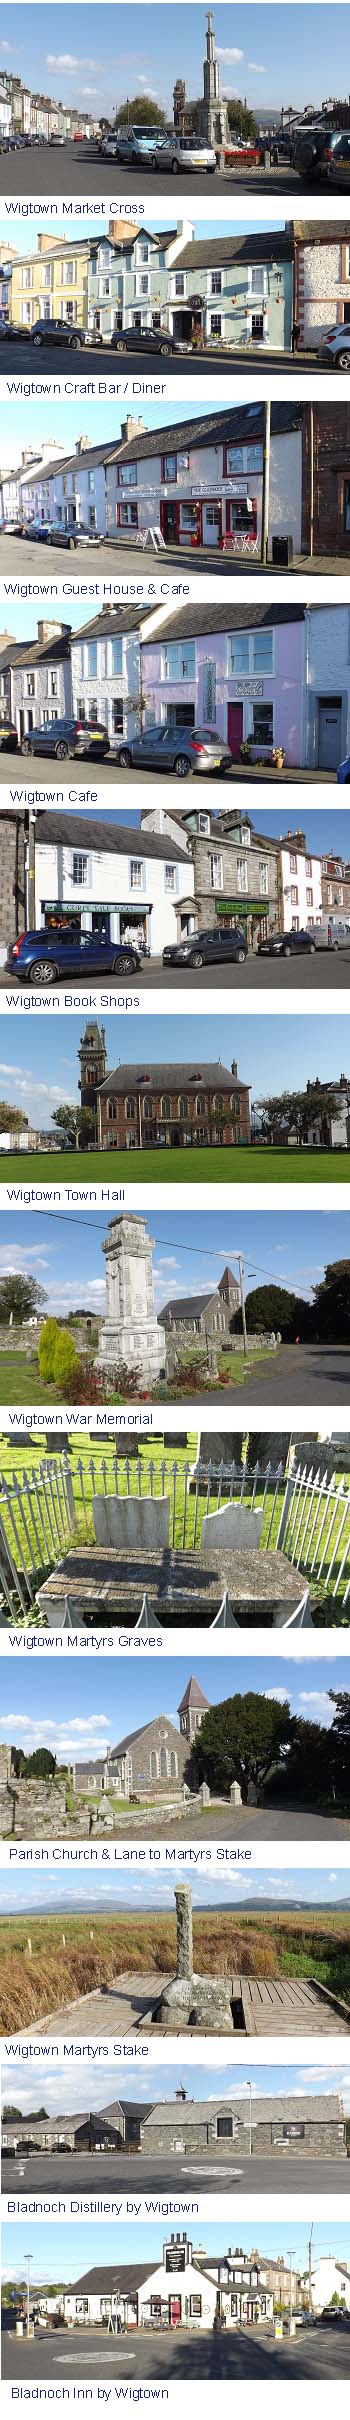 Wigtown Images